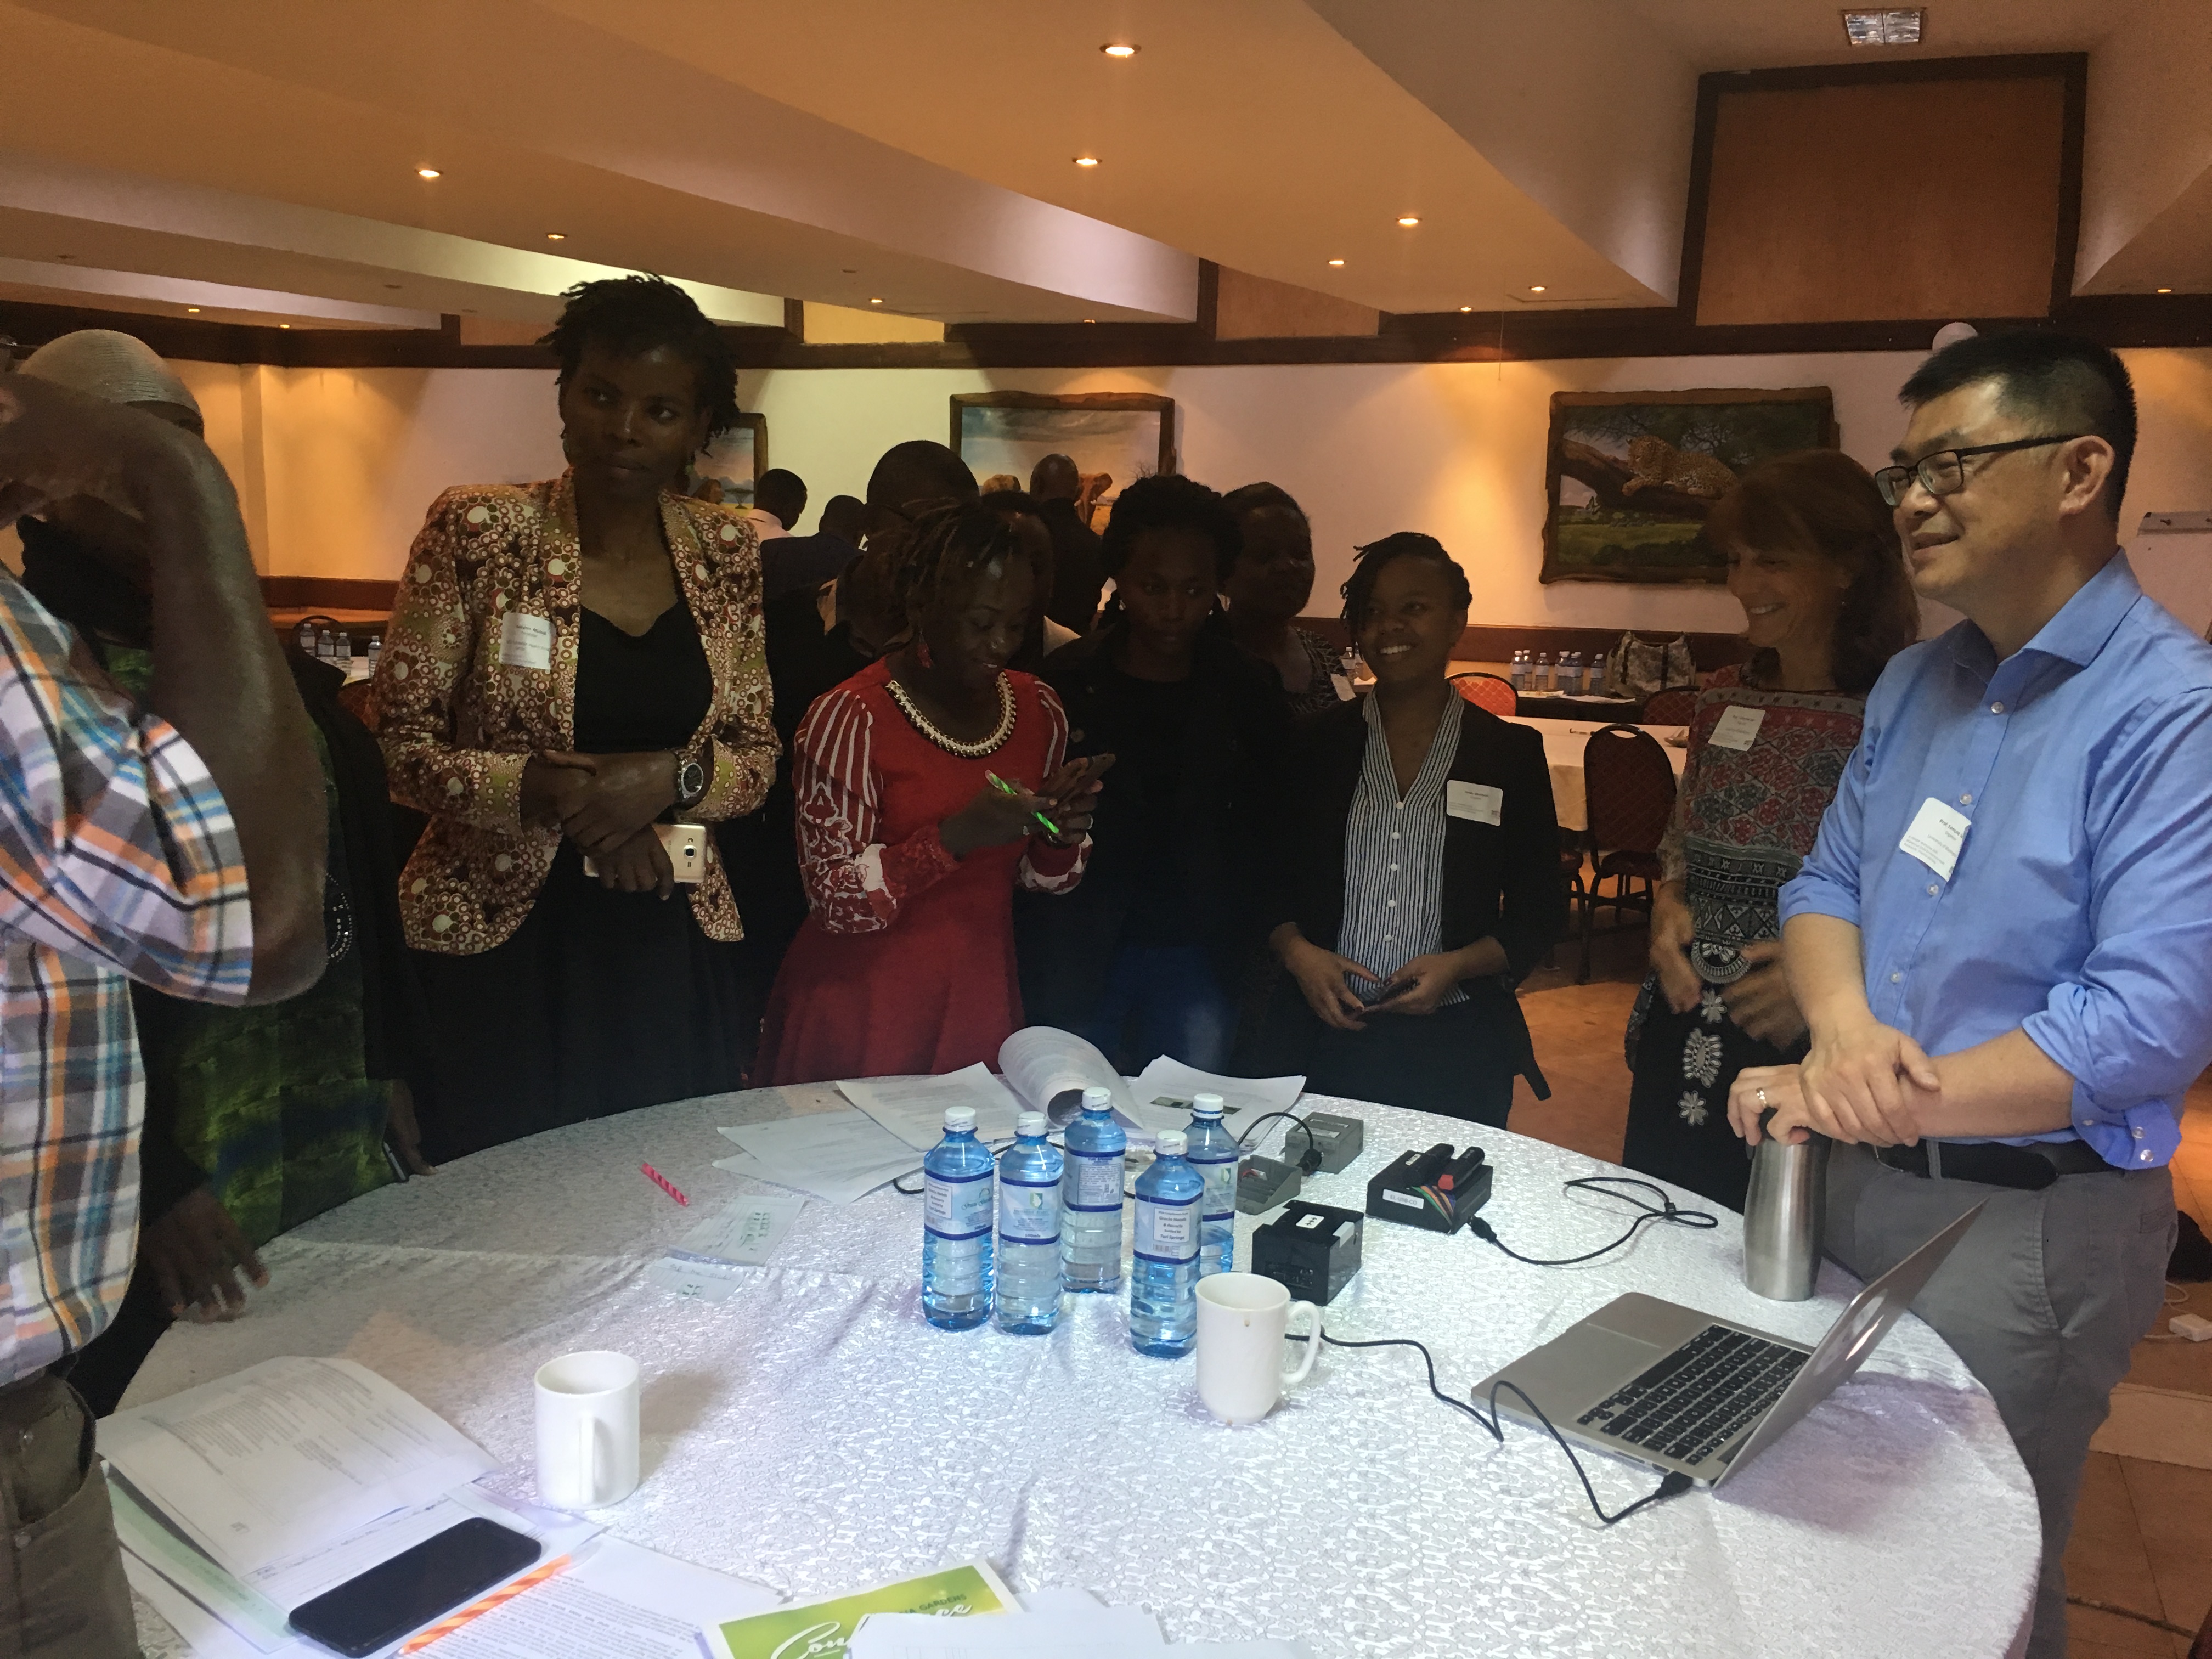 6.	Dr. Edmund Seto and Dr. Catherine Karr (University of Washington) lead an interactive session on air monitors.